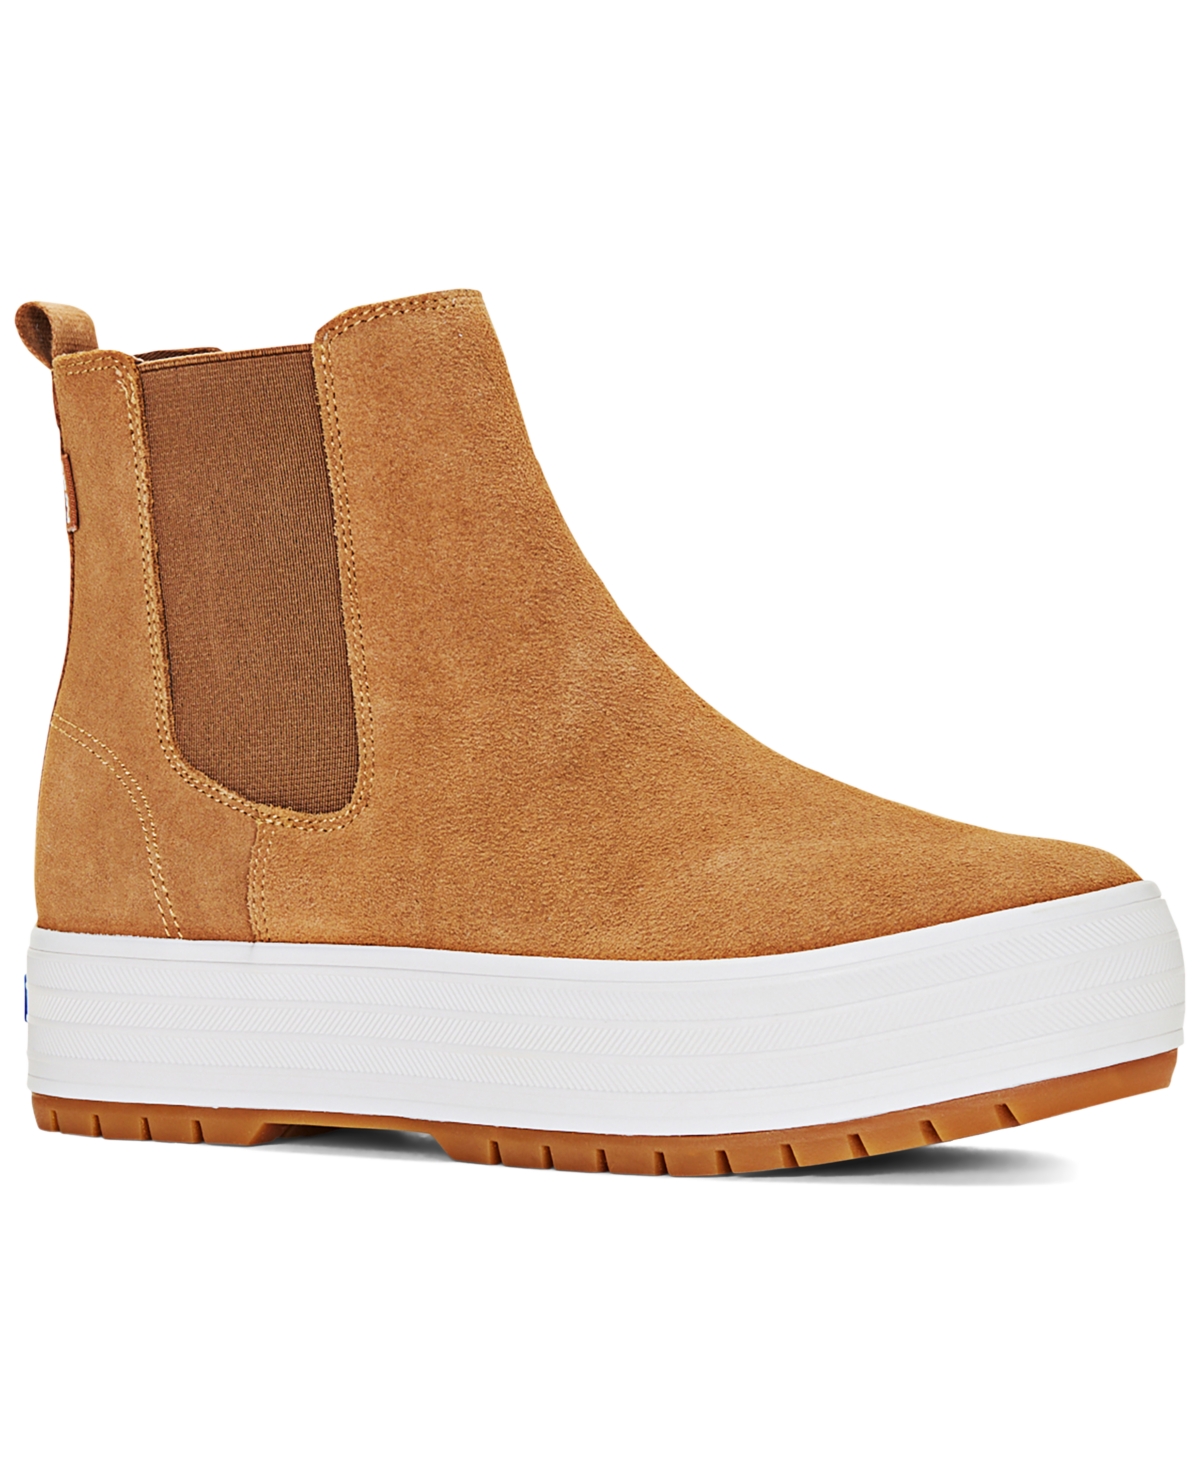 Women's Chelsea Lug Boots from Finish Line - Taupe